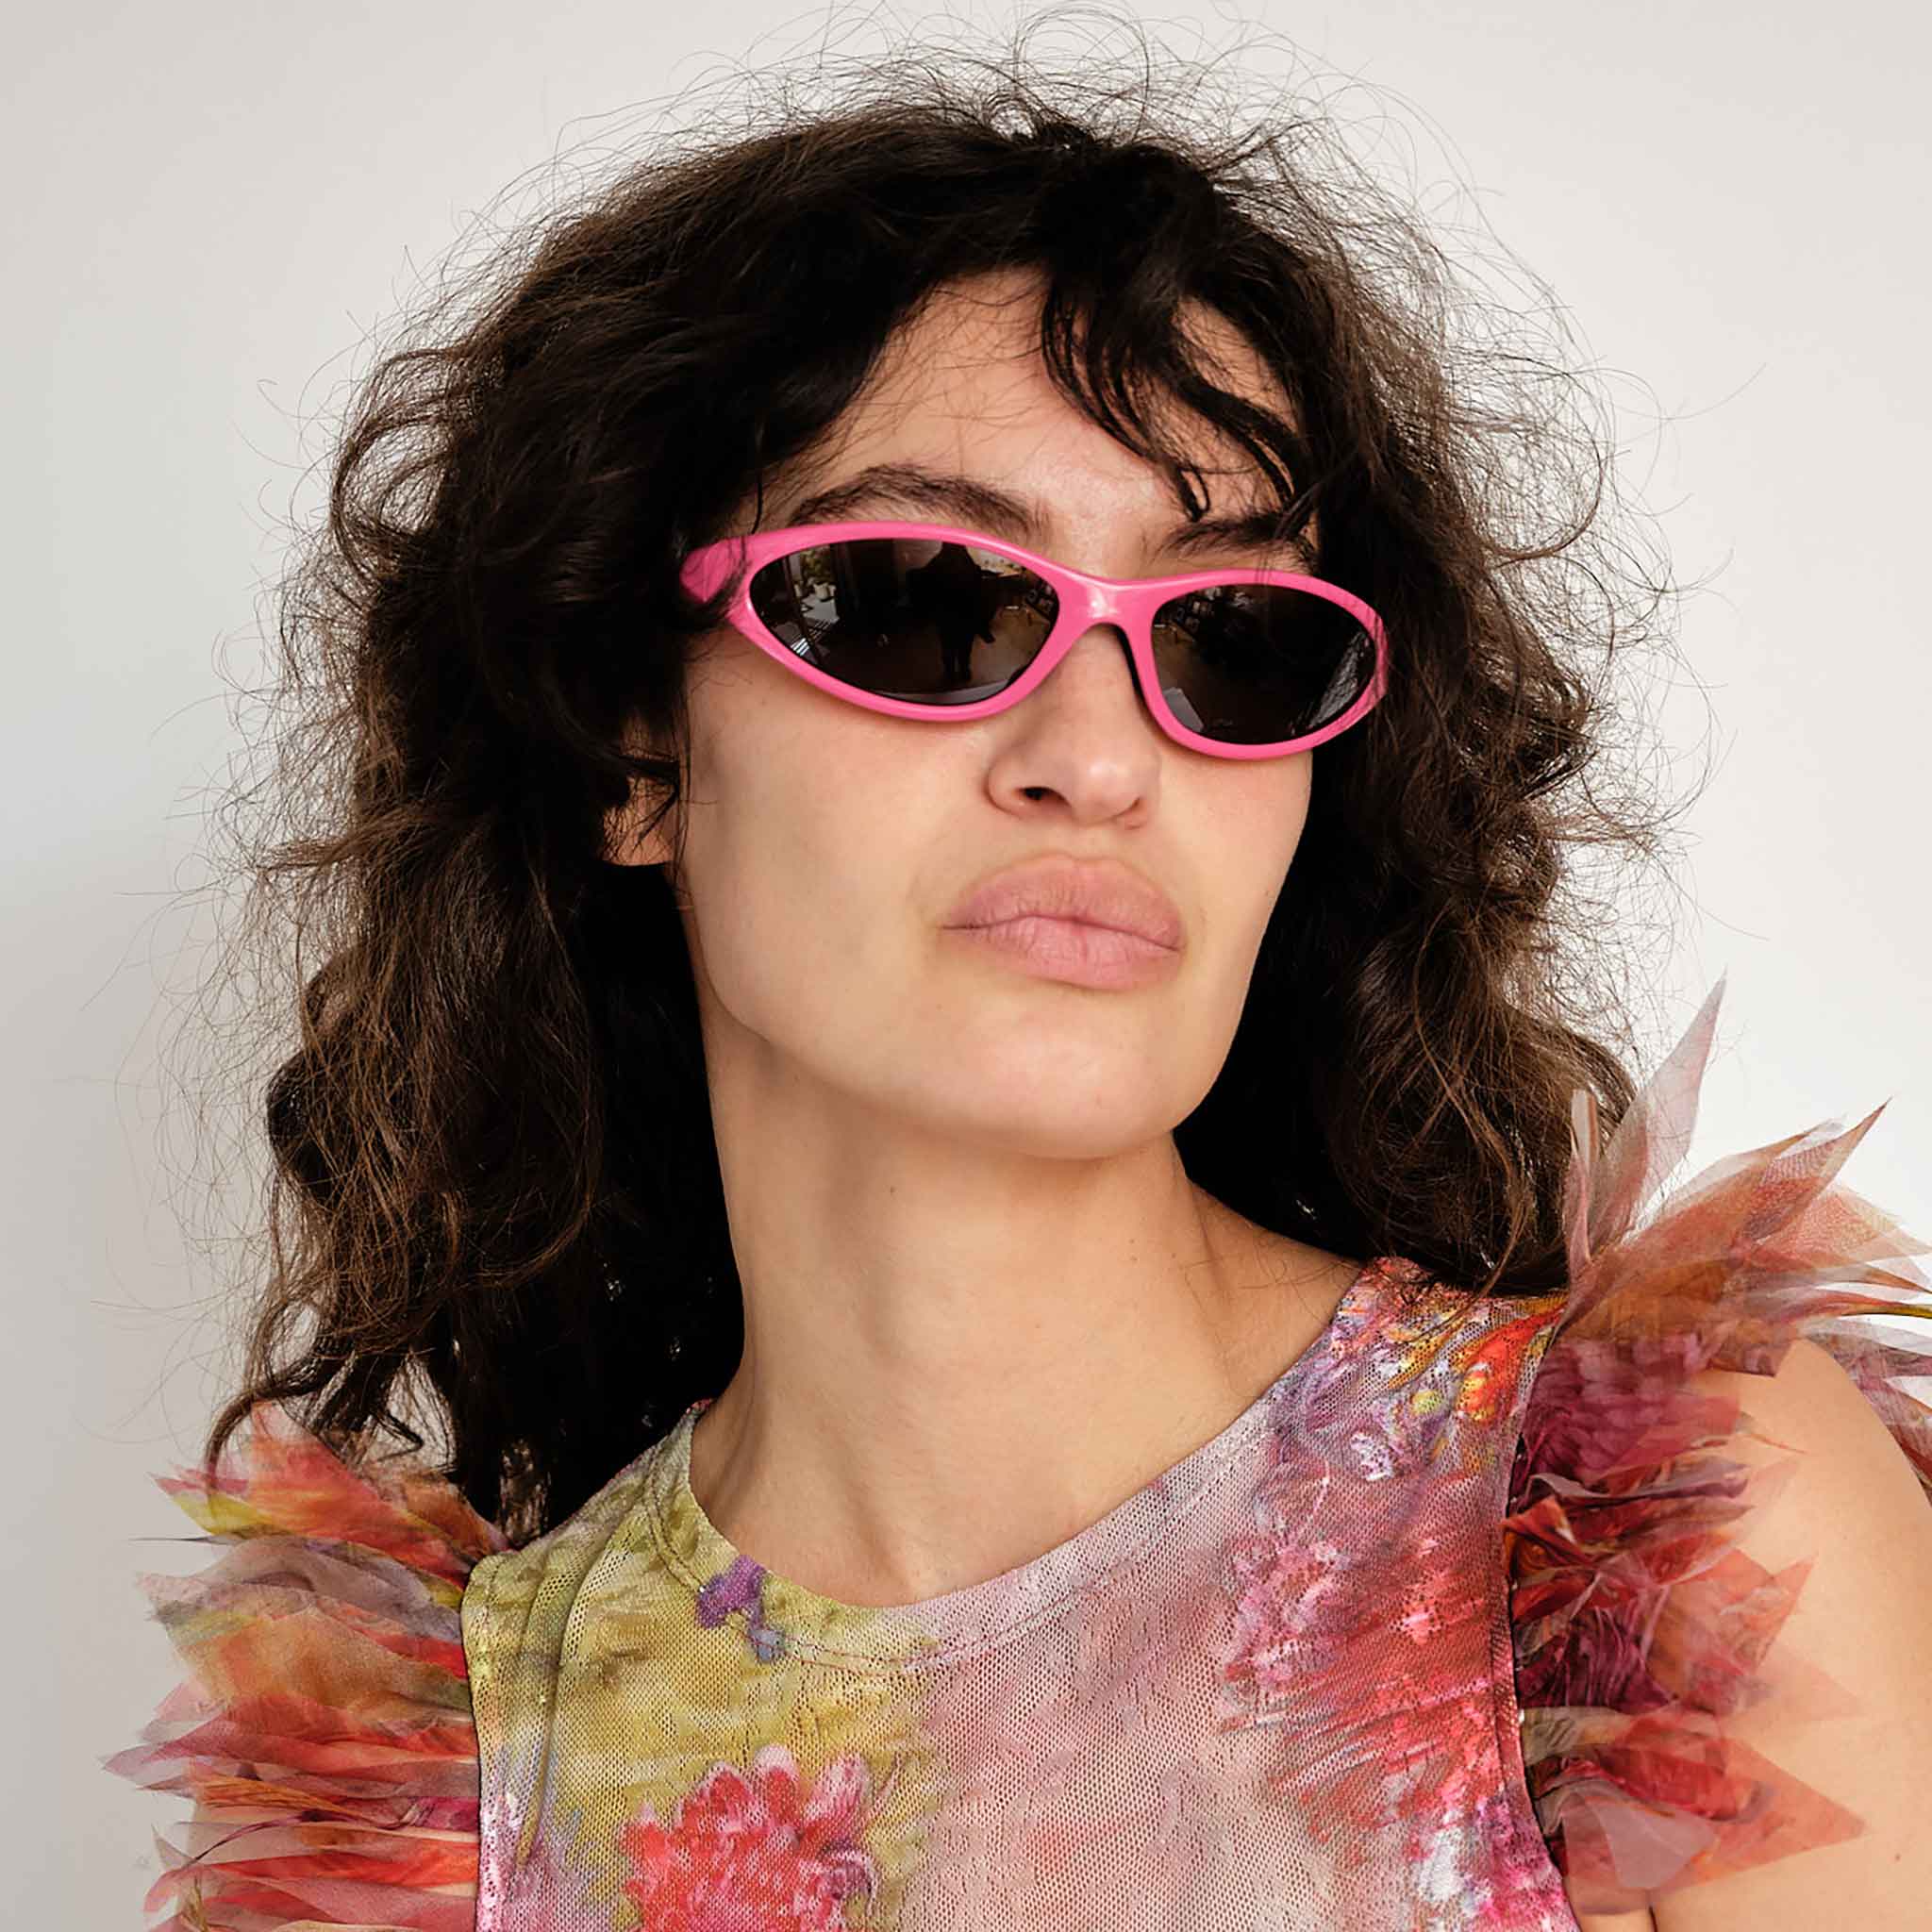 A model wears the Marine Serre x Vuarnet Injected Visionizer in Pink - a narrow and angled pair of sunglasses.